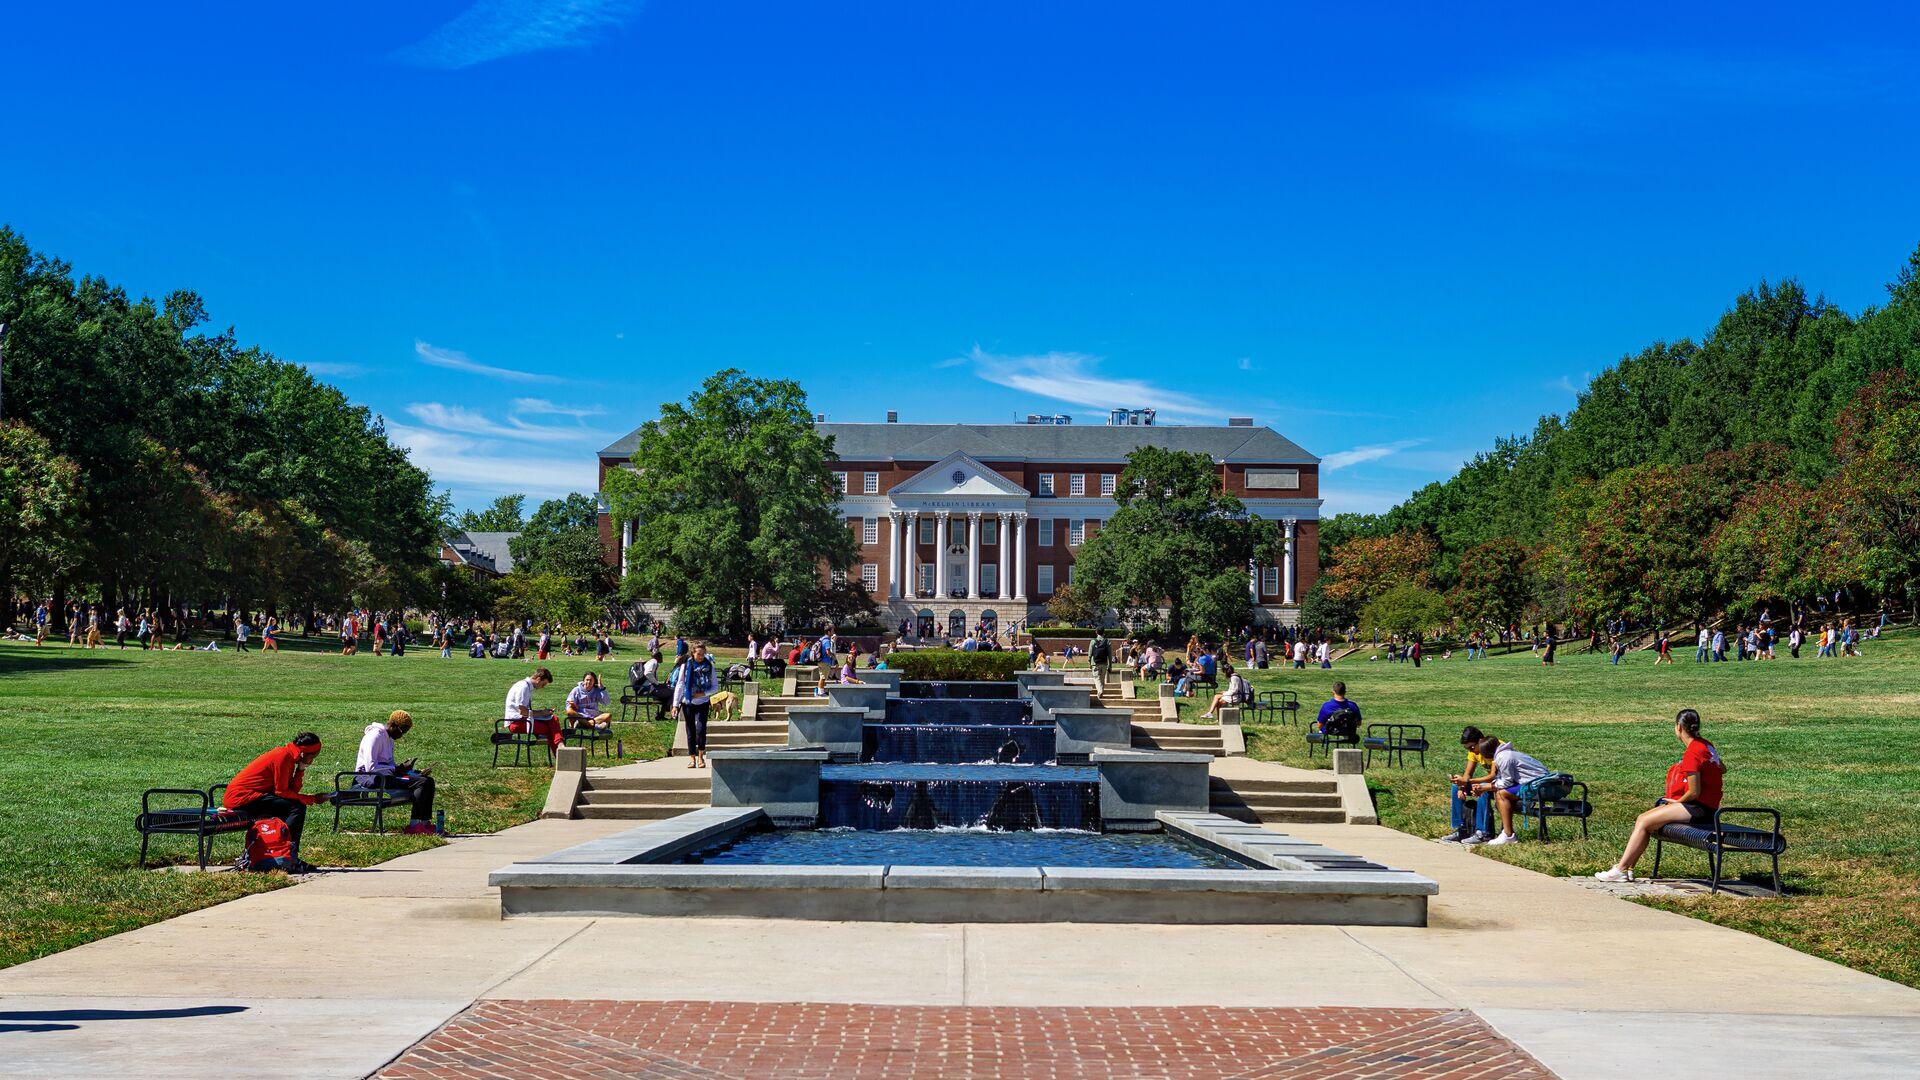 Warm bright day at the end of ODK fountain looking up towards McKeldin Library, Students sit and benches and on the grass studying and enjoying the day